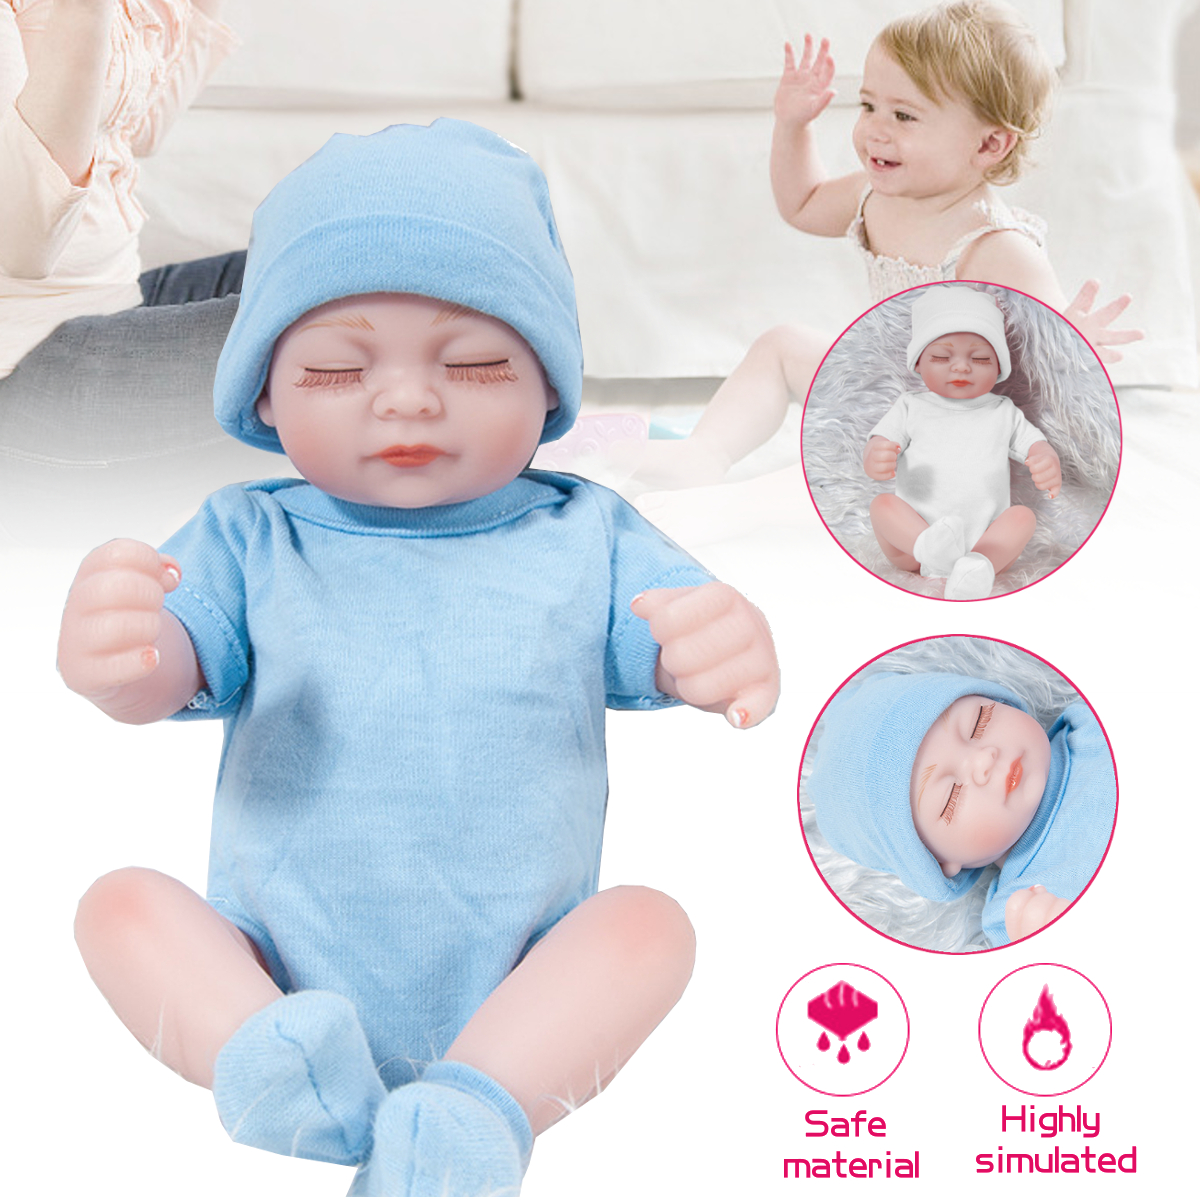 28CM-Soft-Silicone-Realistic-Sleeping-Reborns-Lifelikes-Newborns-Baby-Doll-Toy-with-Moveable-Head-Ar-1891375-3